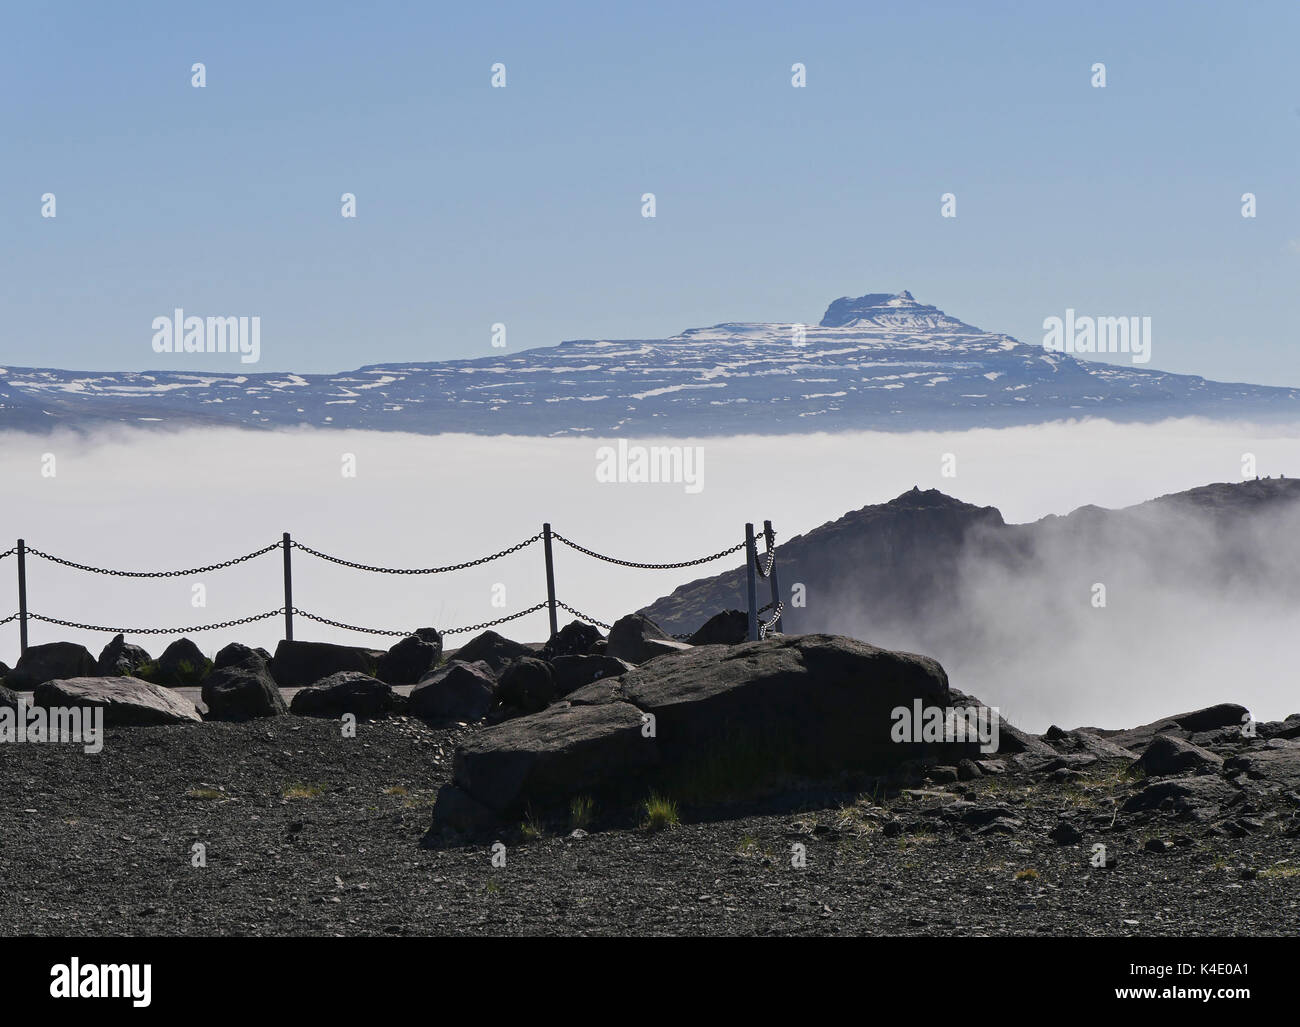 Landscape In The North-East Of Iceland, Wafts Of Mist Over Holmanes Fjord Stock Photo